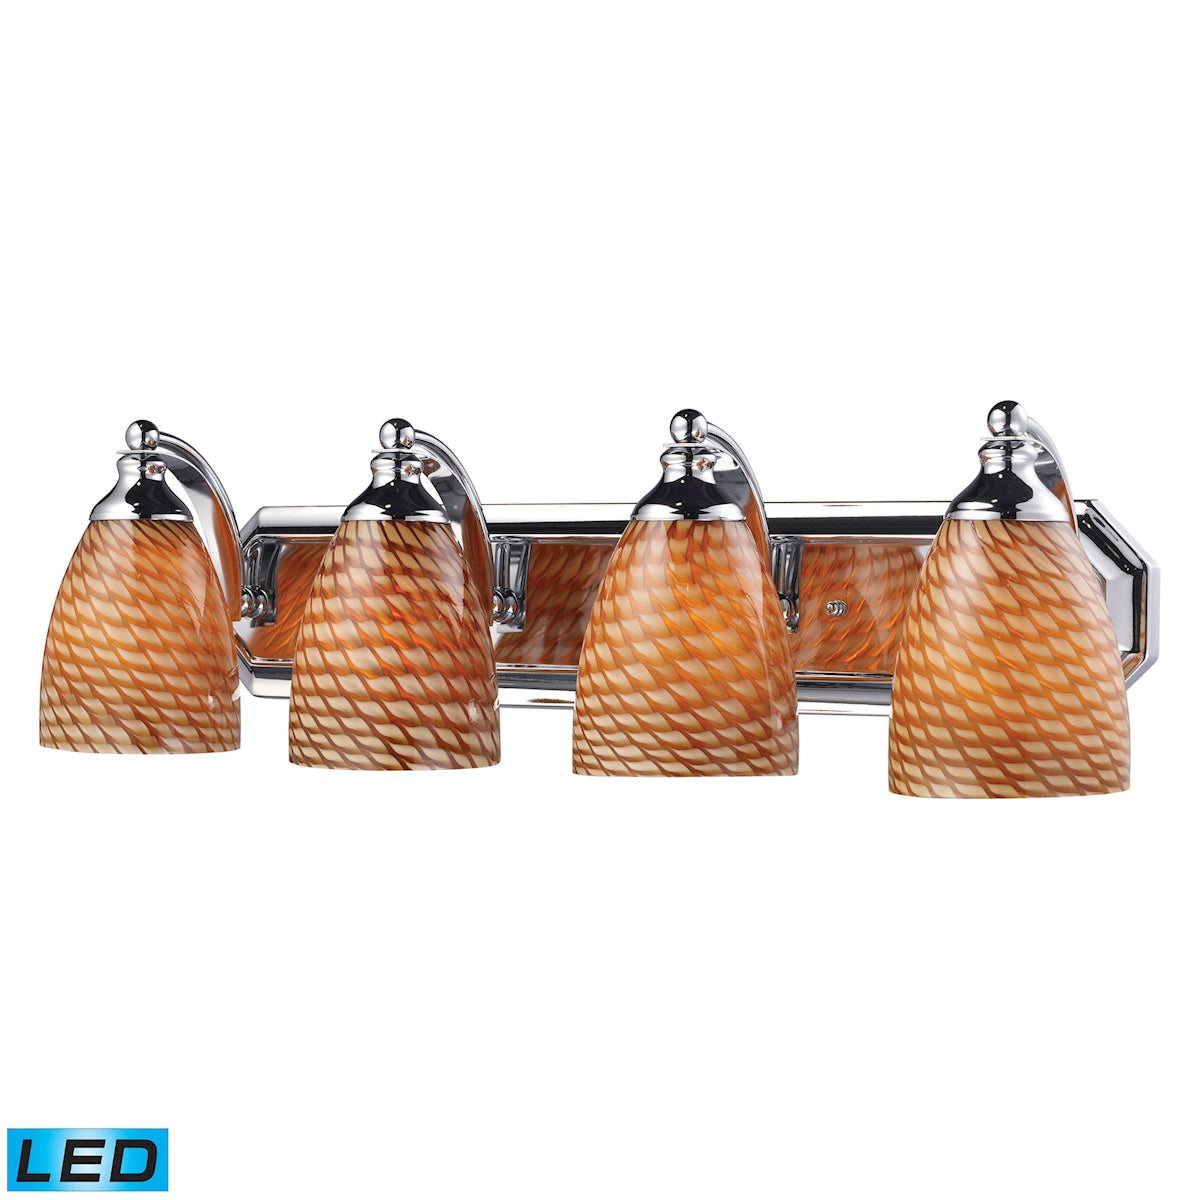 ELK Lighting 570-4C-C-LED Mix and Match Vanity 4-Light Wall Lamp in Chrome with Cocoa Glass - Includes LED Bulbs